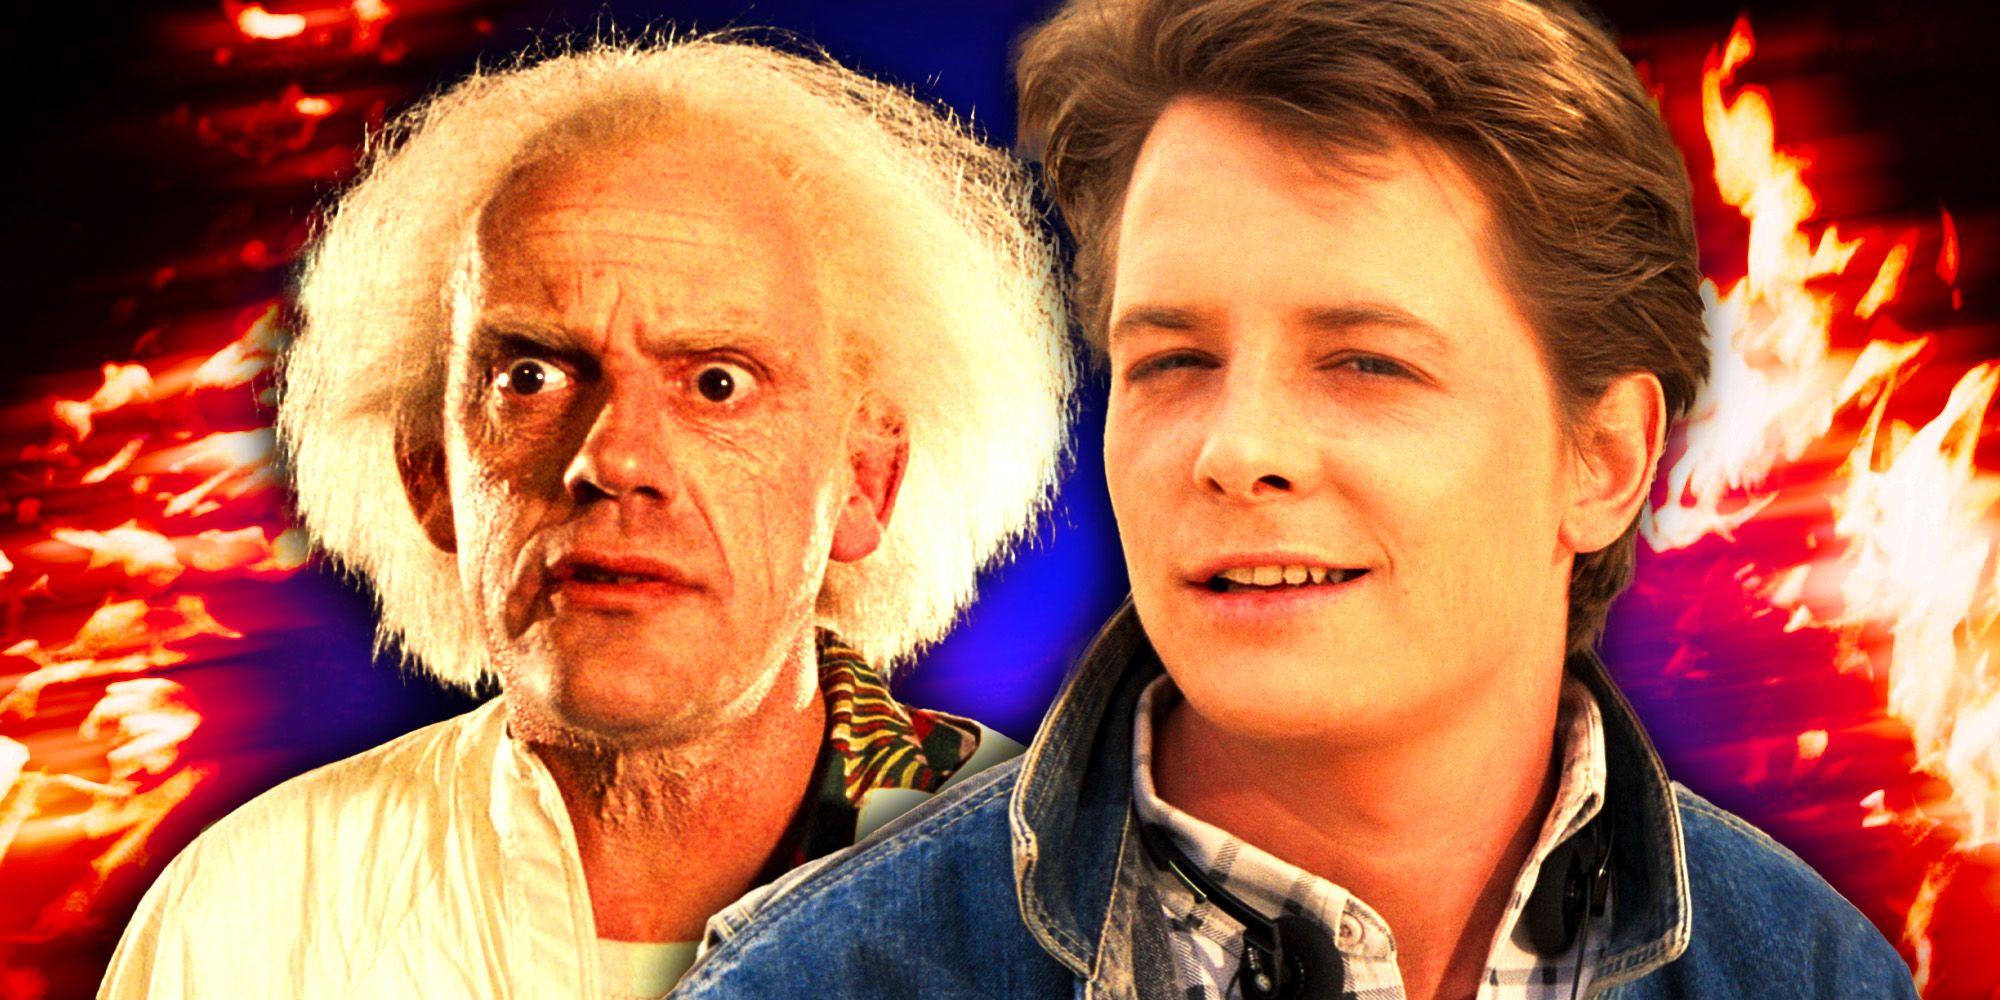 New Apple TV Sci-Fi Story Reveals The Dark Truth Behind Back To The Future’s Ending